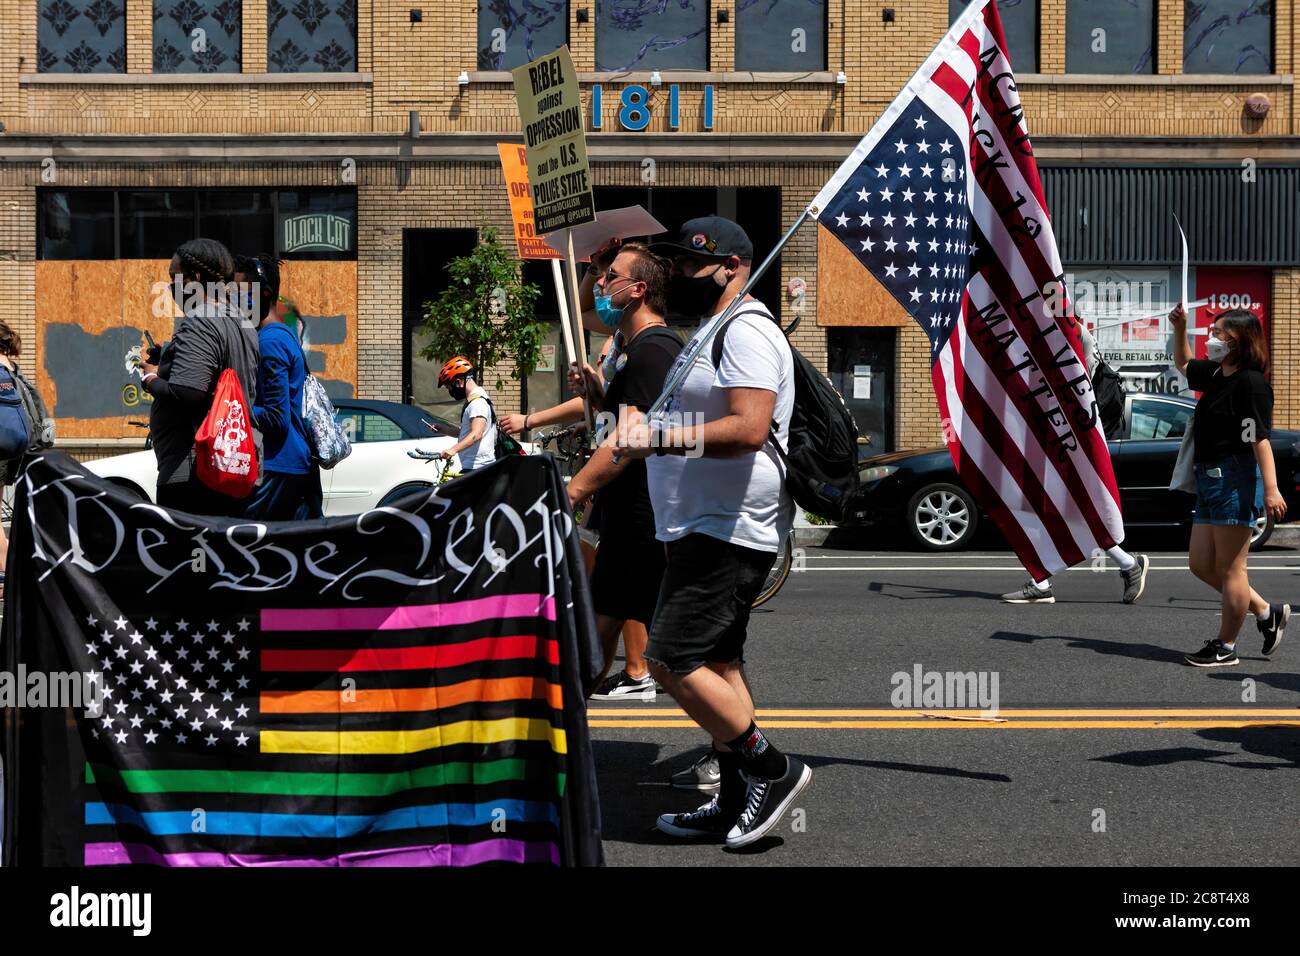 Rainbow American flag that says 'We the people' and protester carrying flag upside down at March Against Trump's Police State, Washington, DC, USA Stock Photo